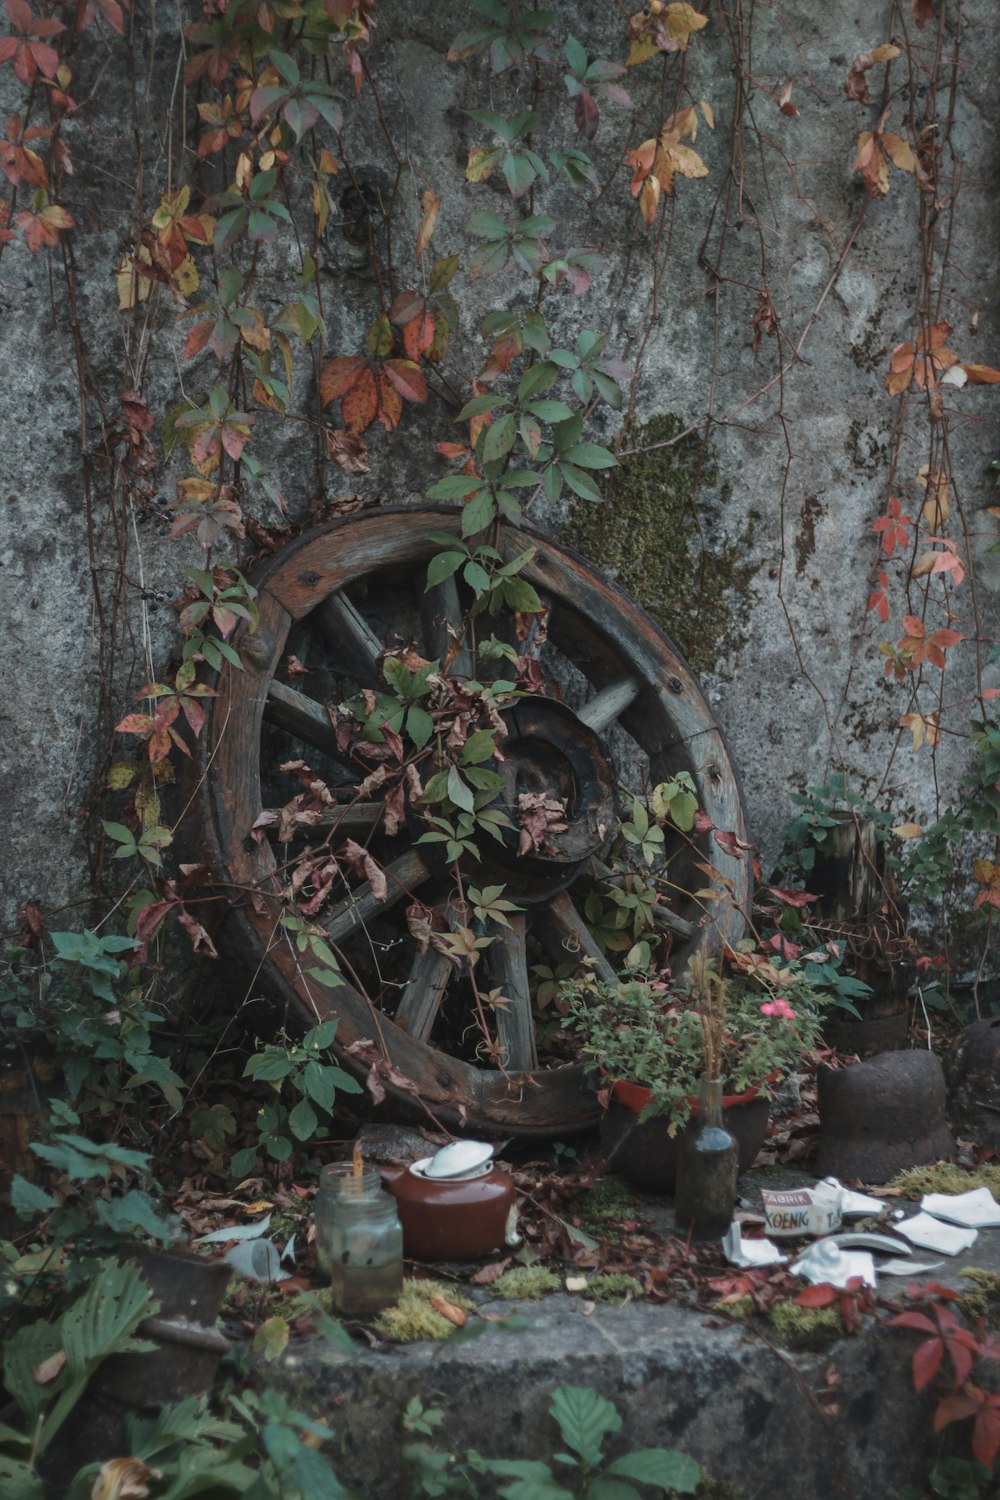 an old wheel surrounded by plants and pots